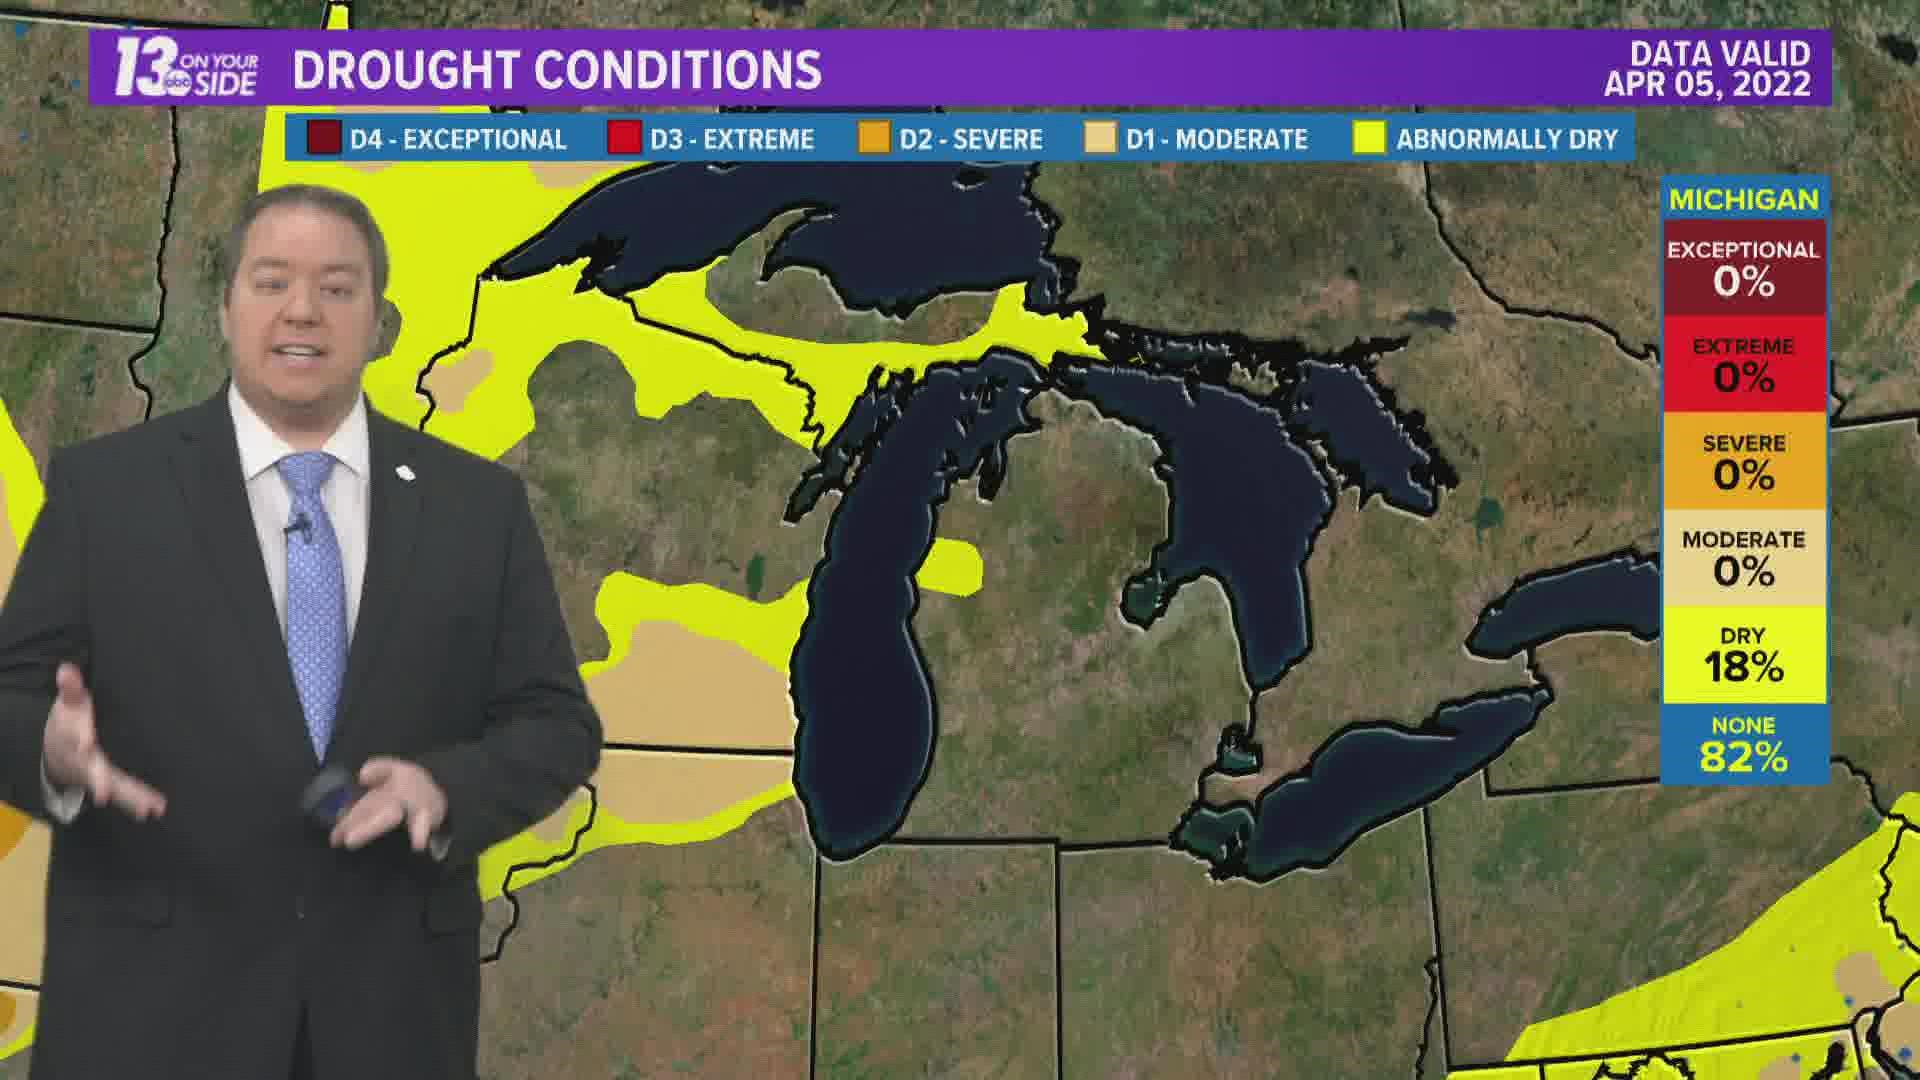 Meteorologist Michael Behrens breaks down the drought changes and the forecast for the months ahead.